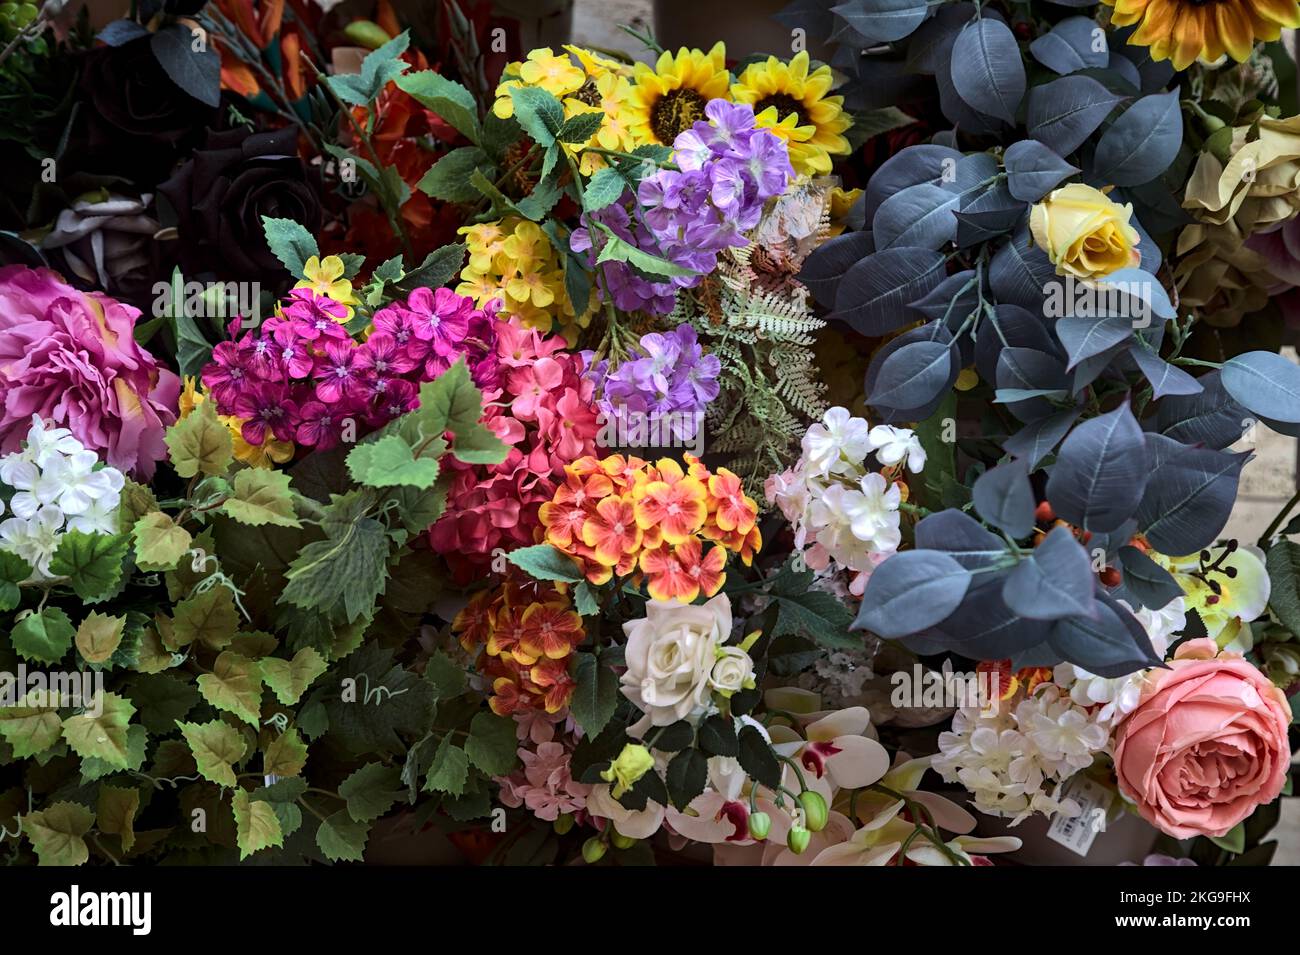 Fake  flowers on a stall seen up close Stock Photo